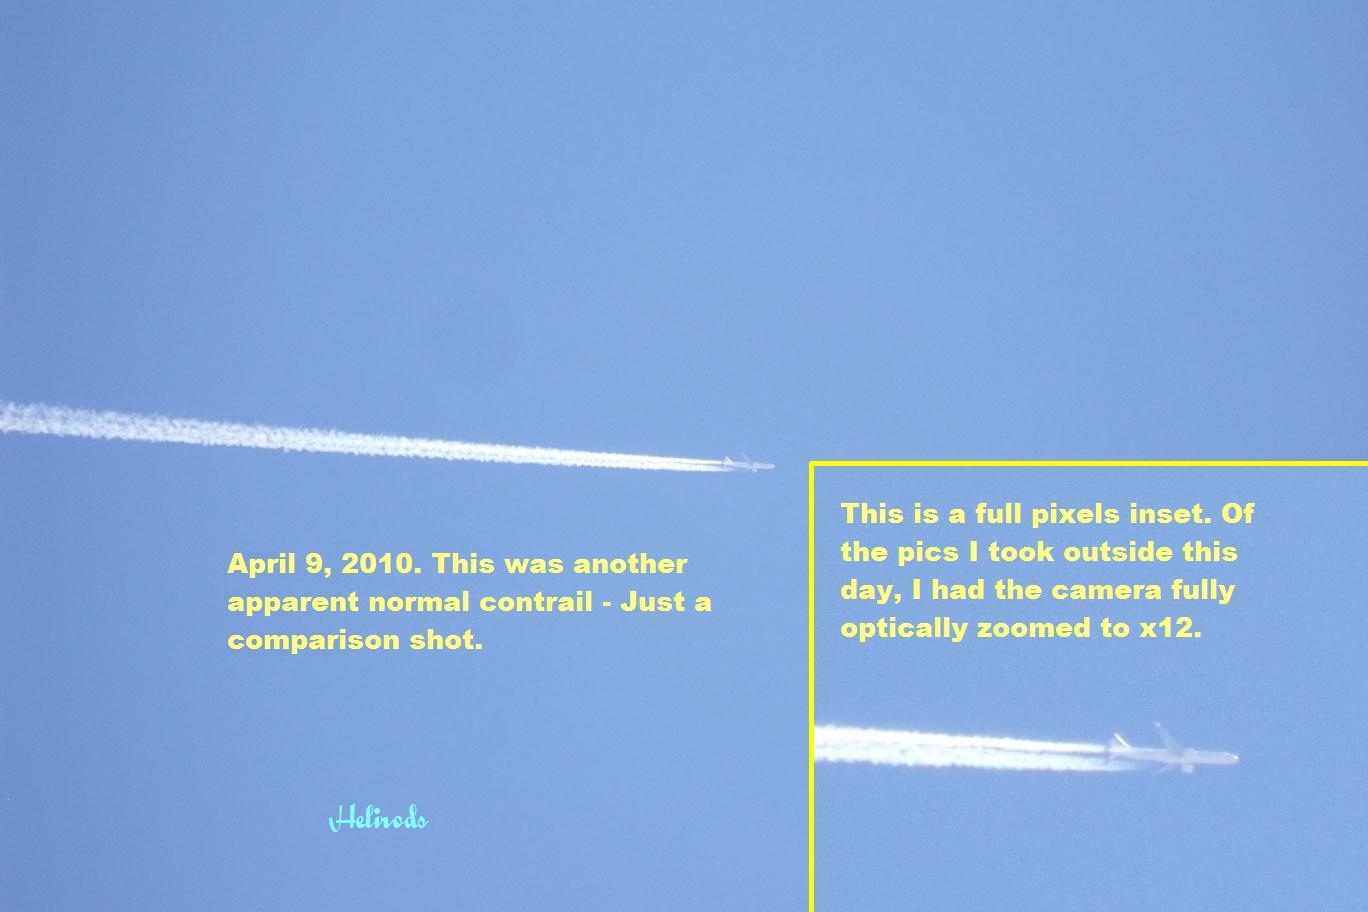 Another typical contrail